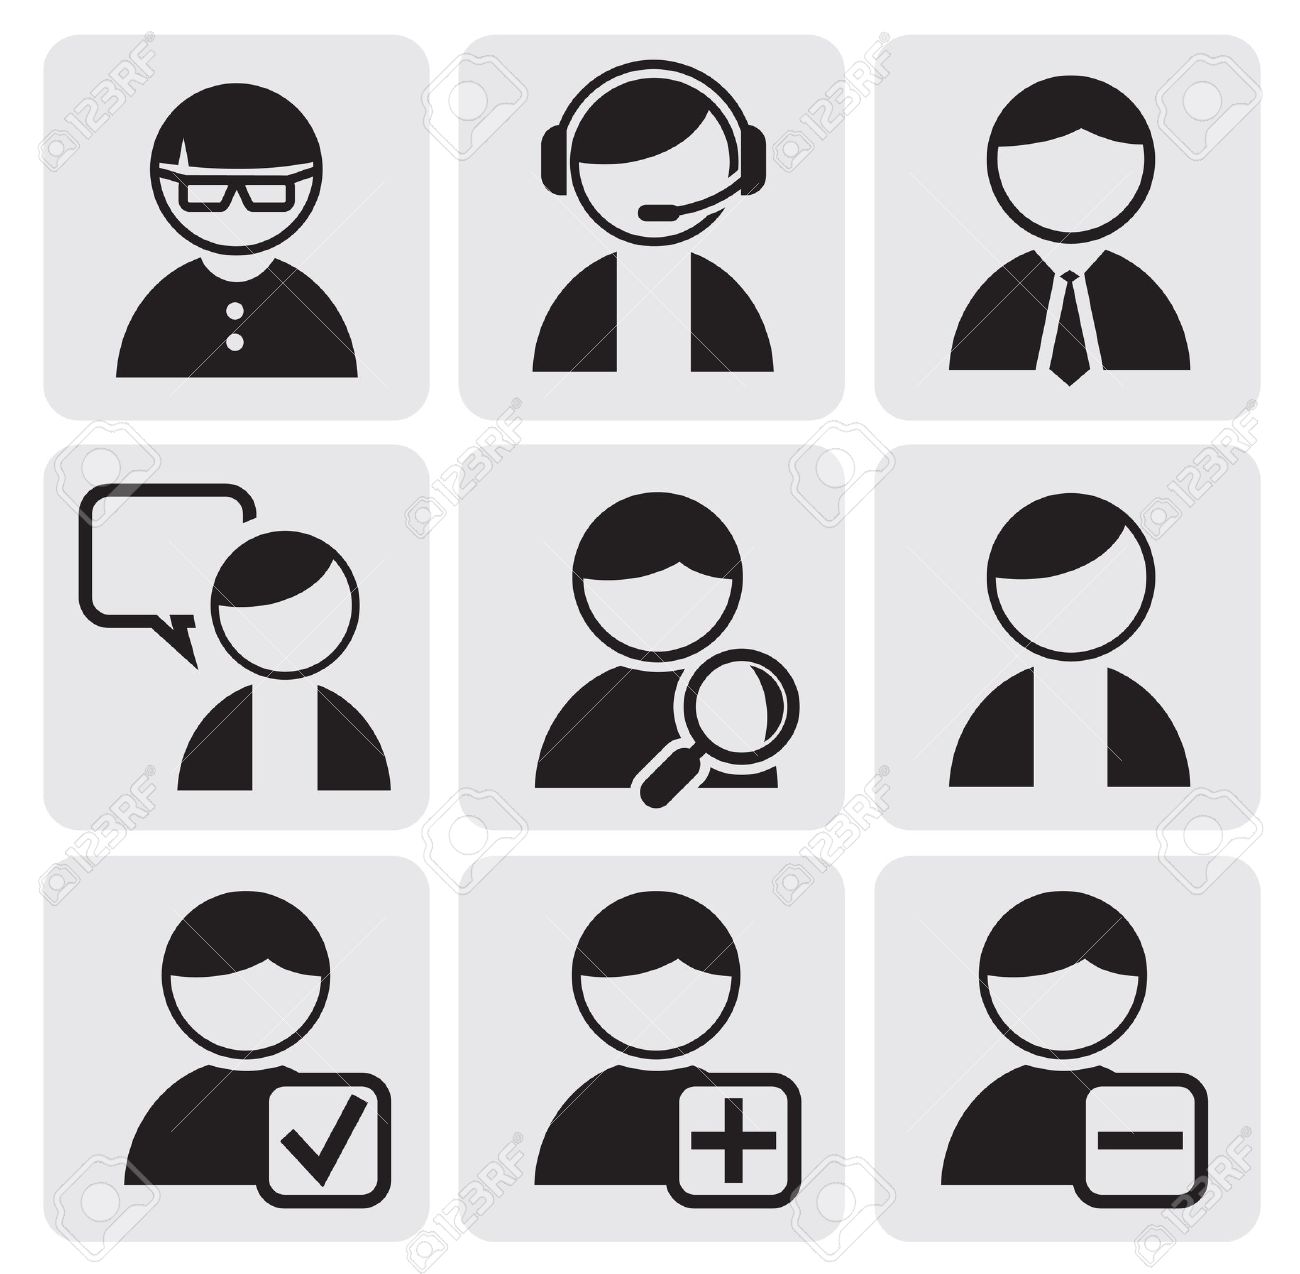 Person Icons Vector Art  Graphics | freevector.com